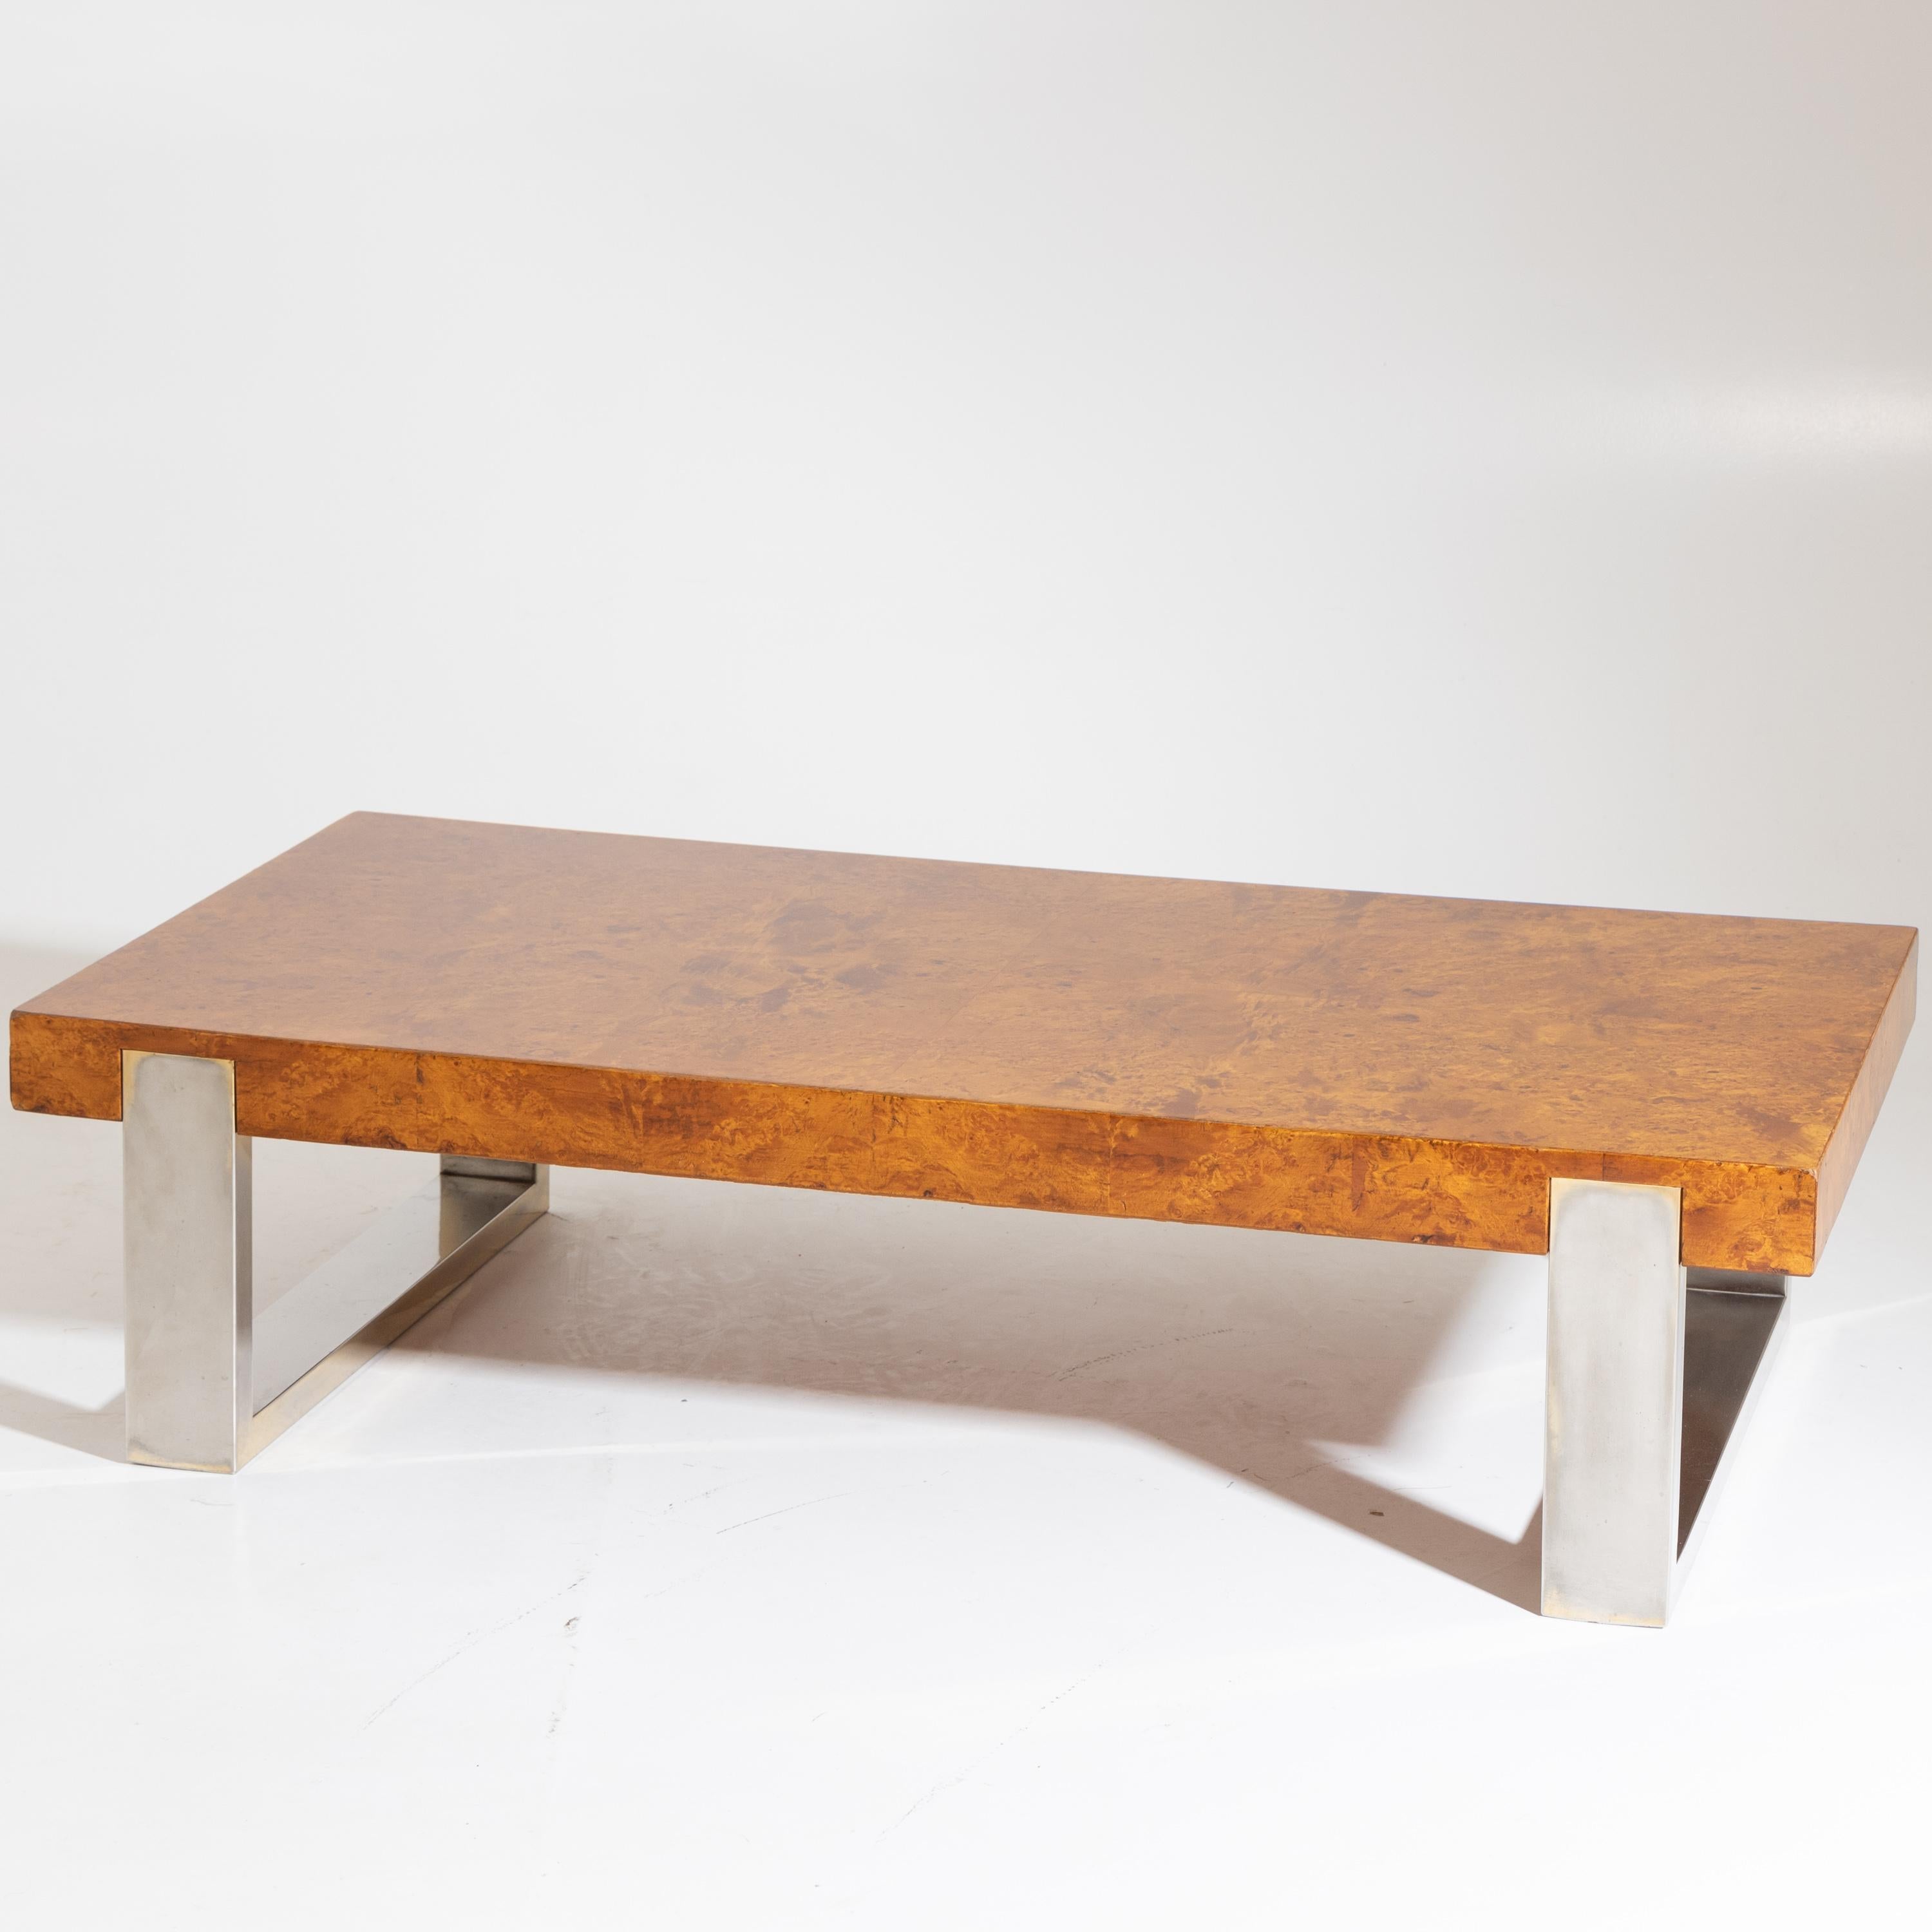 Coffee table standing on u-shaped metal supports with a thick rectangular tabletop, veneered in poplar burl.